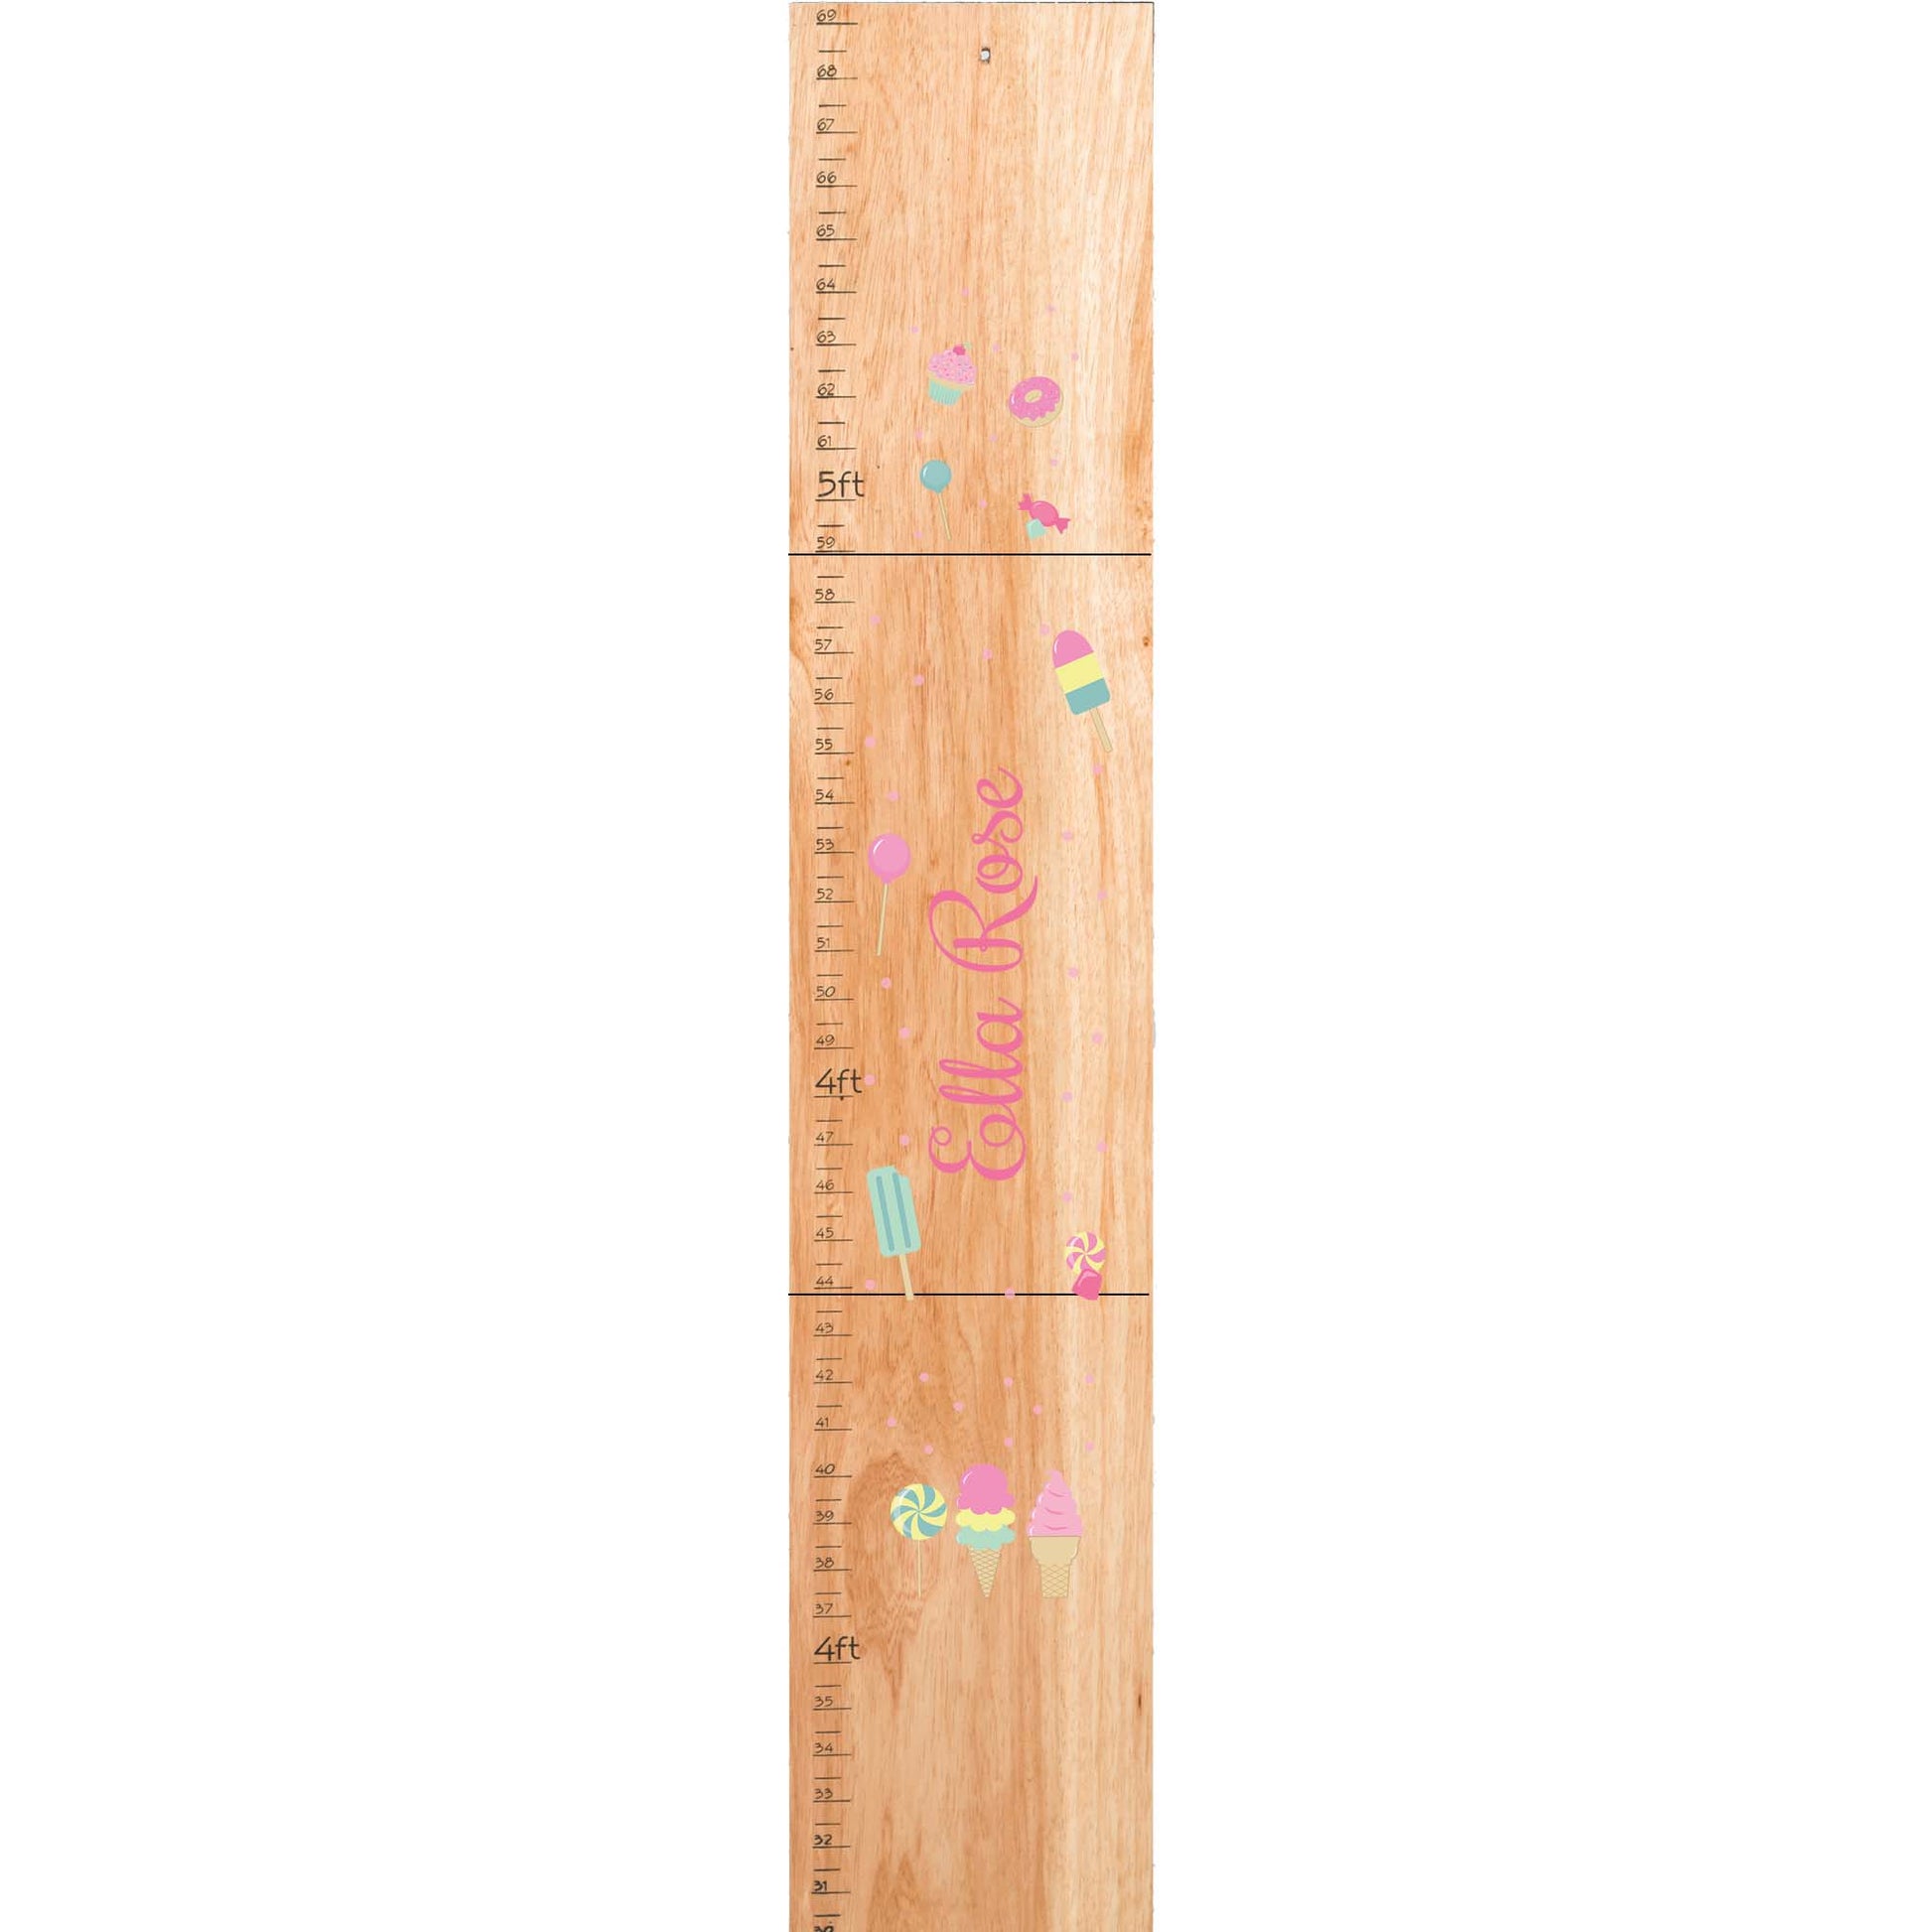 Personalized Natural Growth Chart With Strawberries Design